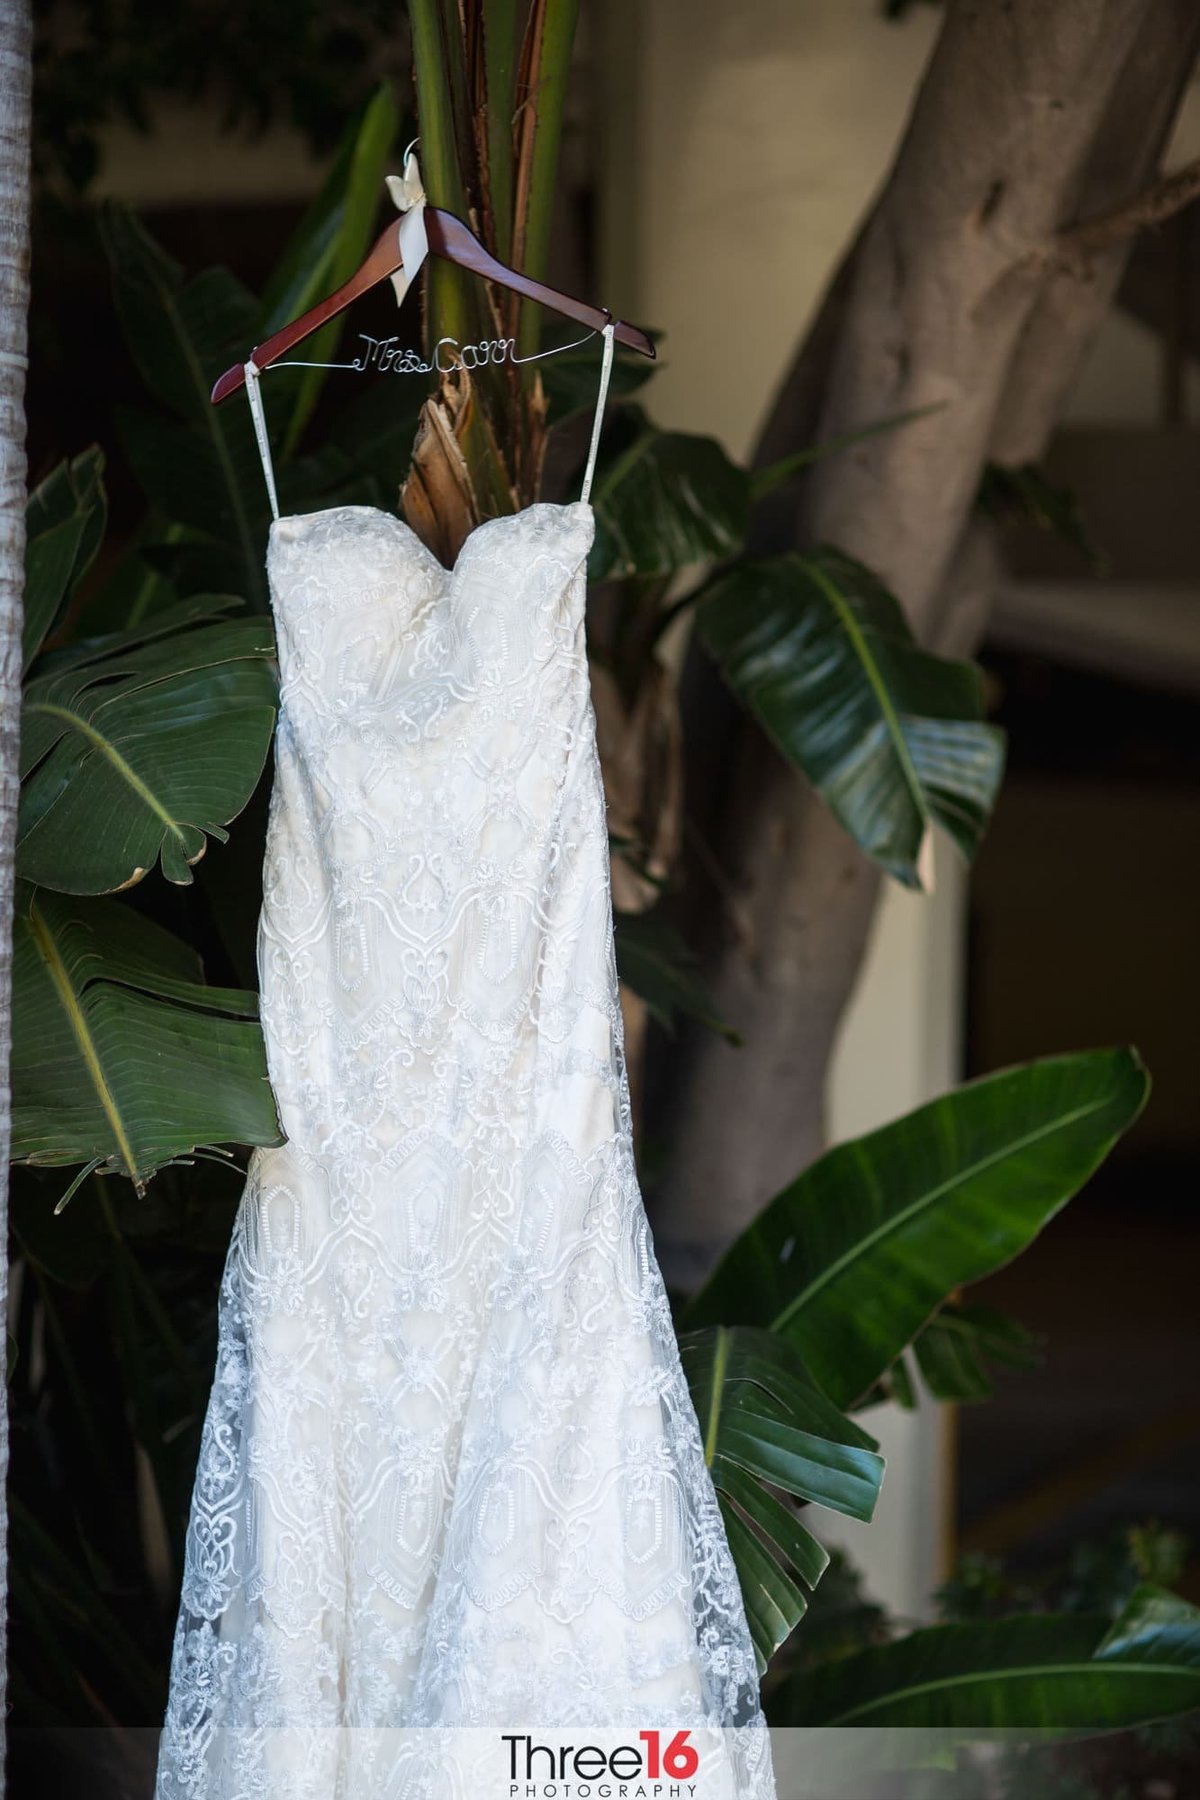 Brides gown hangs from a tree on display